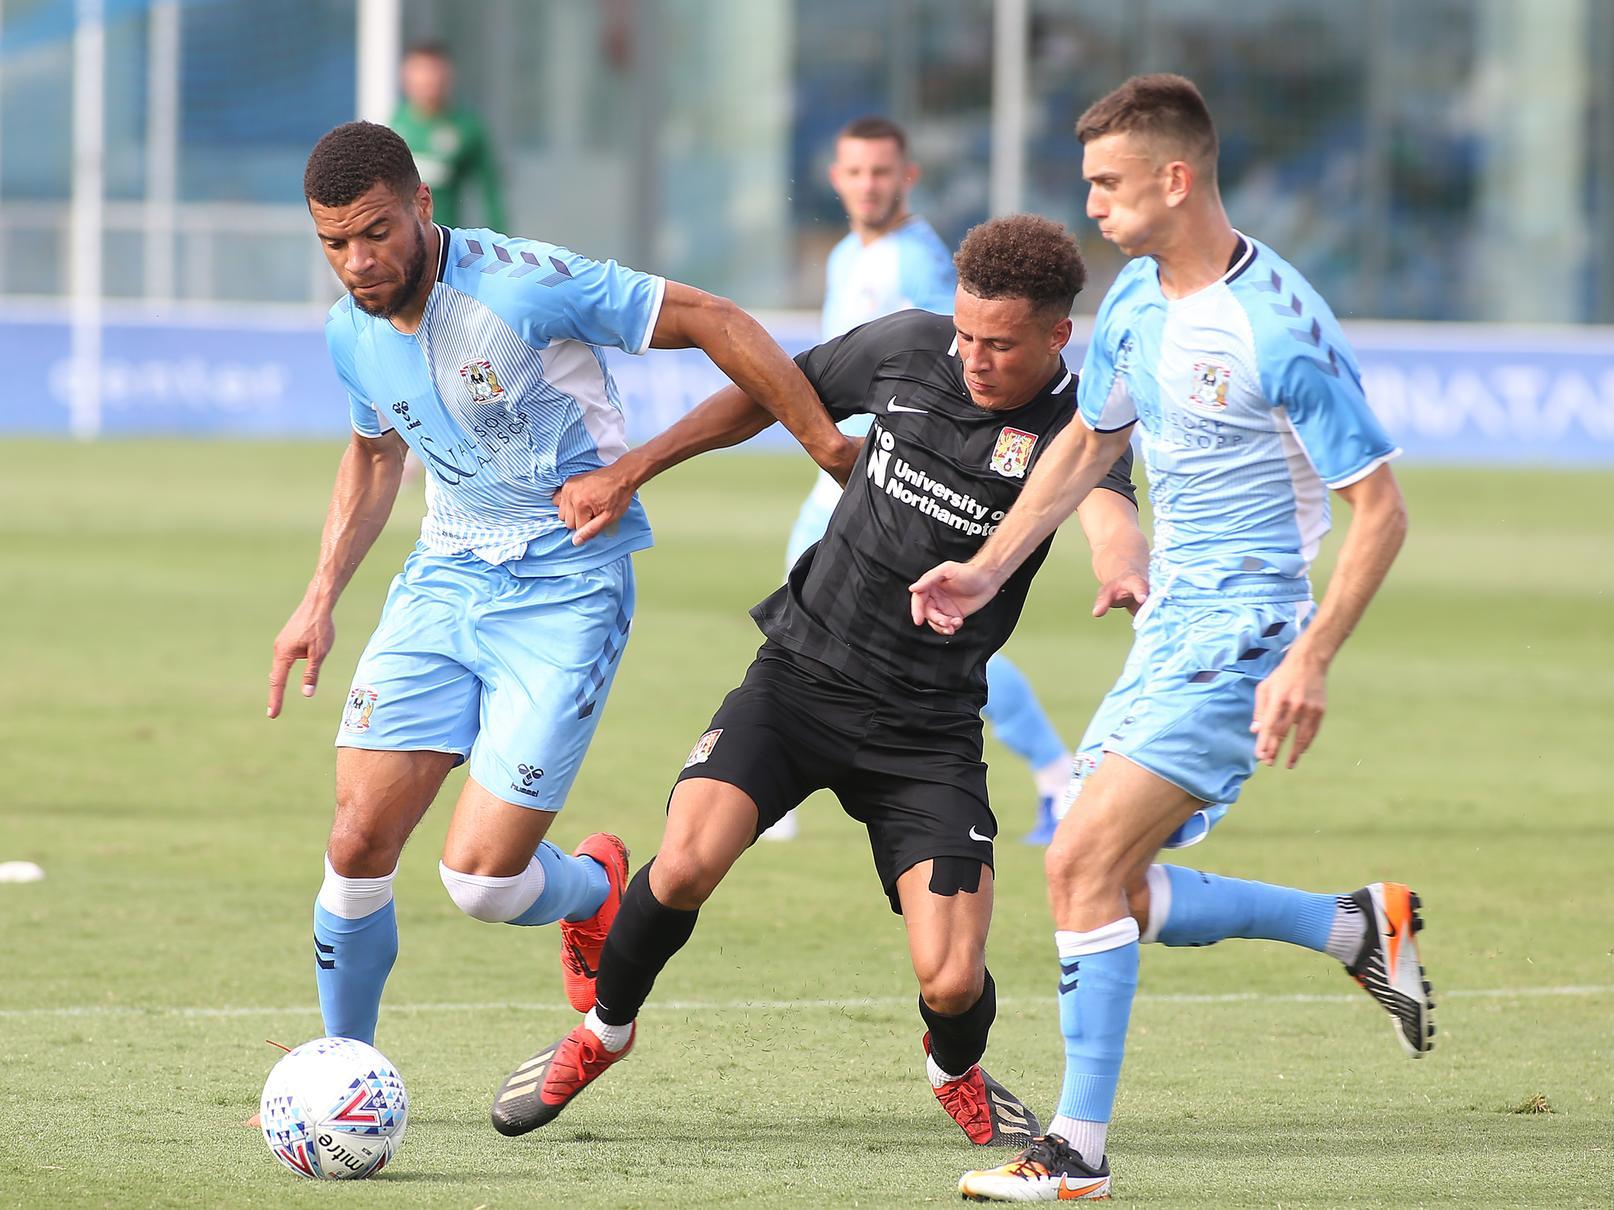 Leeds United are rumoured to be battling it out with Bristol City and Cardiff City to sign Coventry City midfielder Zain Westbrooke. The ex-Chelsea academy youngster is said to be valued at around 2m. (Sky Sports News)